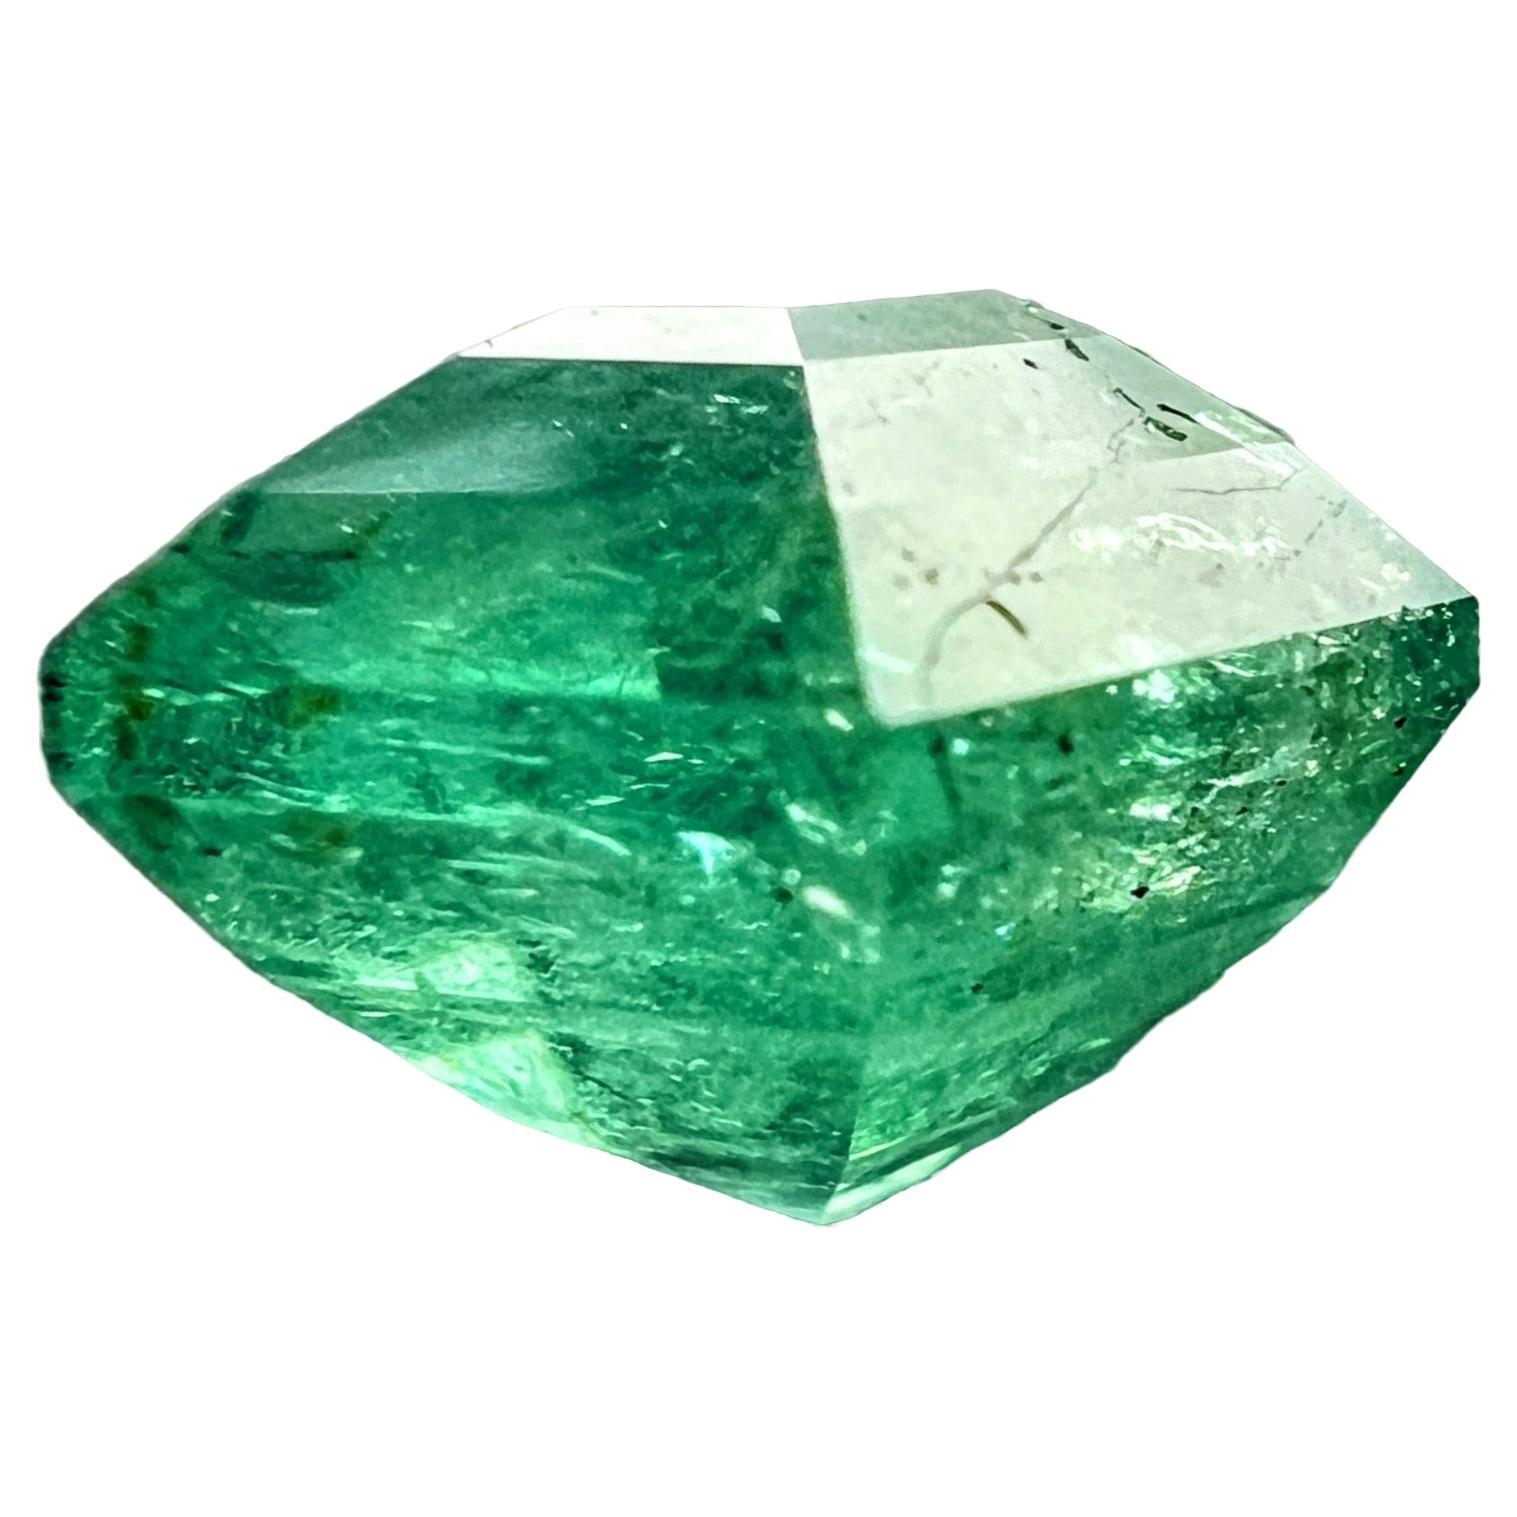 NO RESERVE 4.56ct Octagonal Cut NO OIL Untreated Natural EMERALD Gemstone For Sale 1